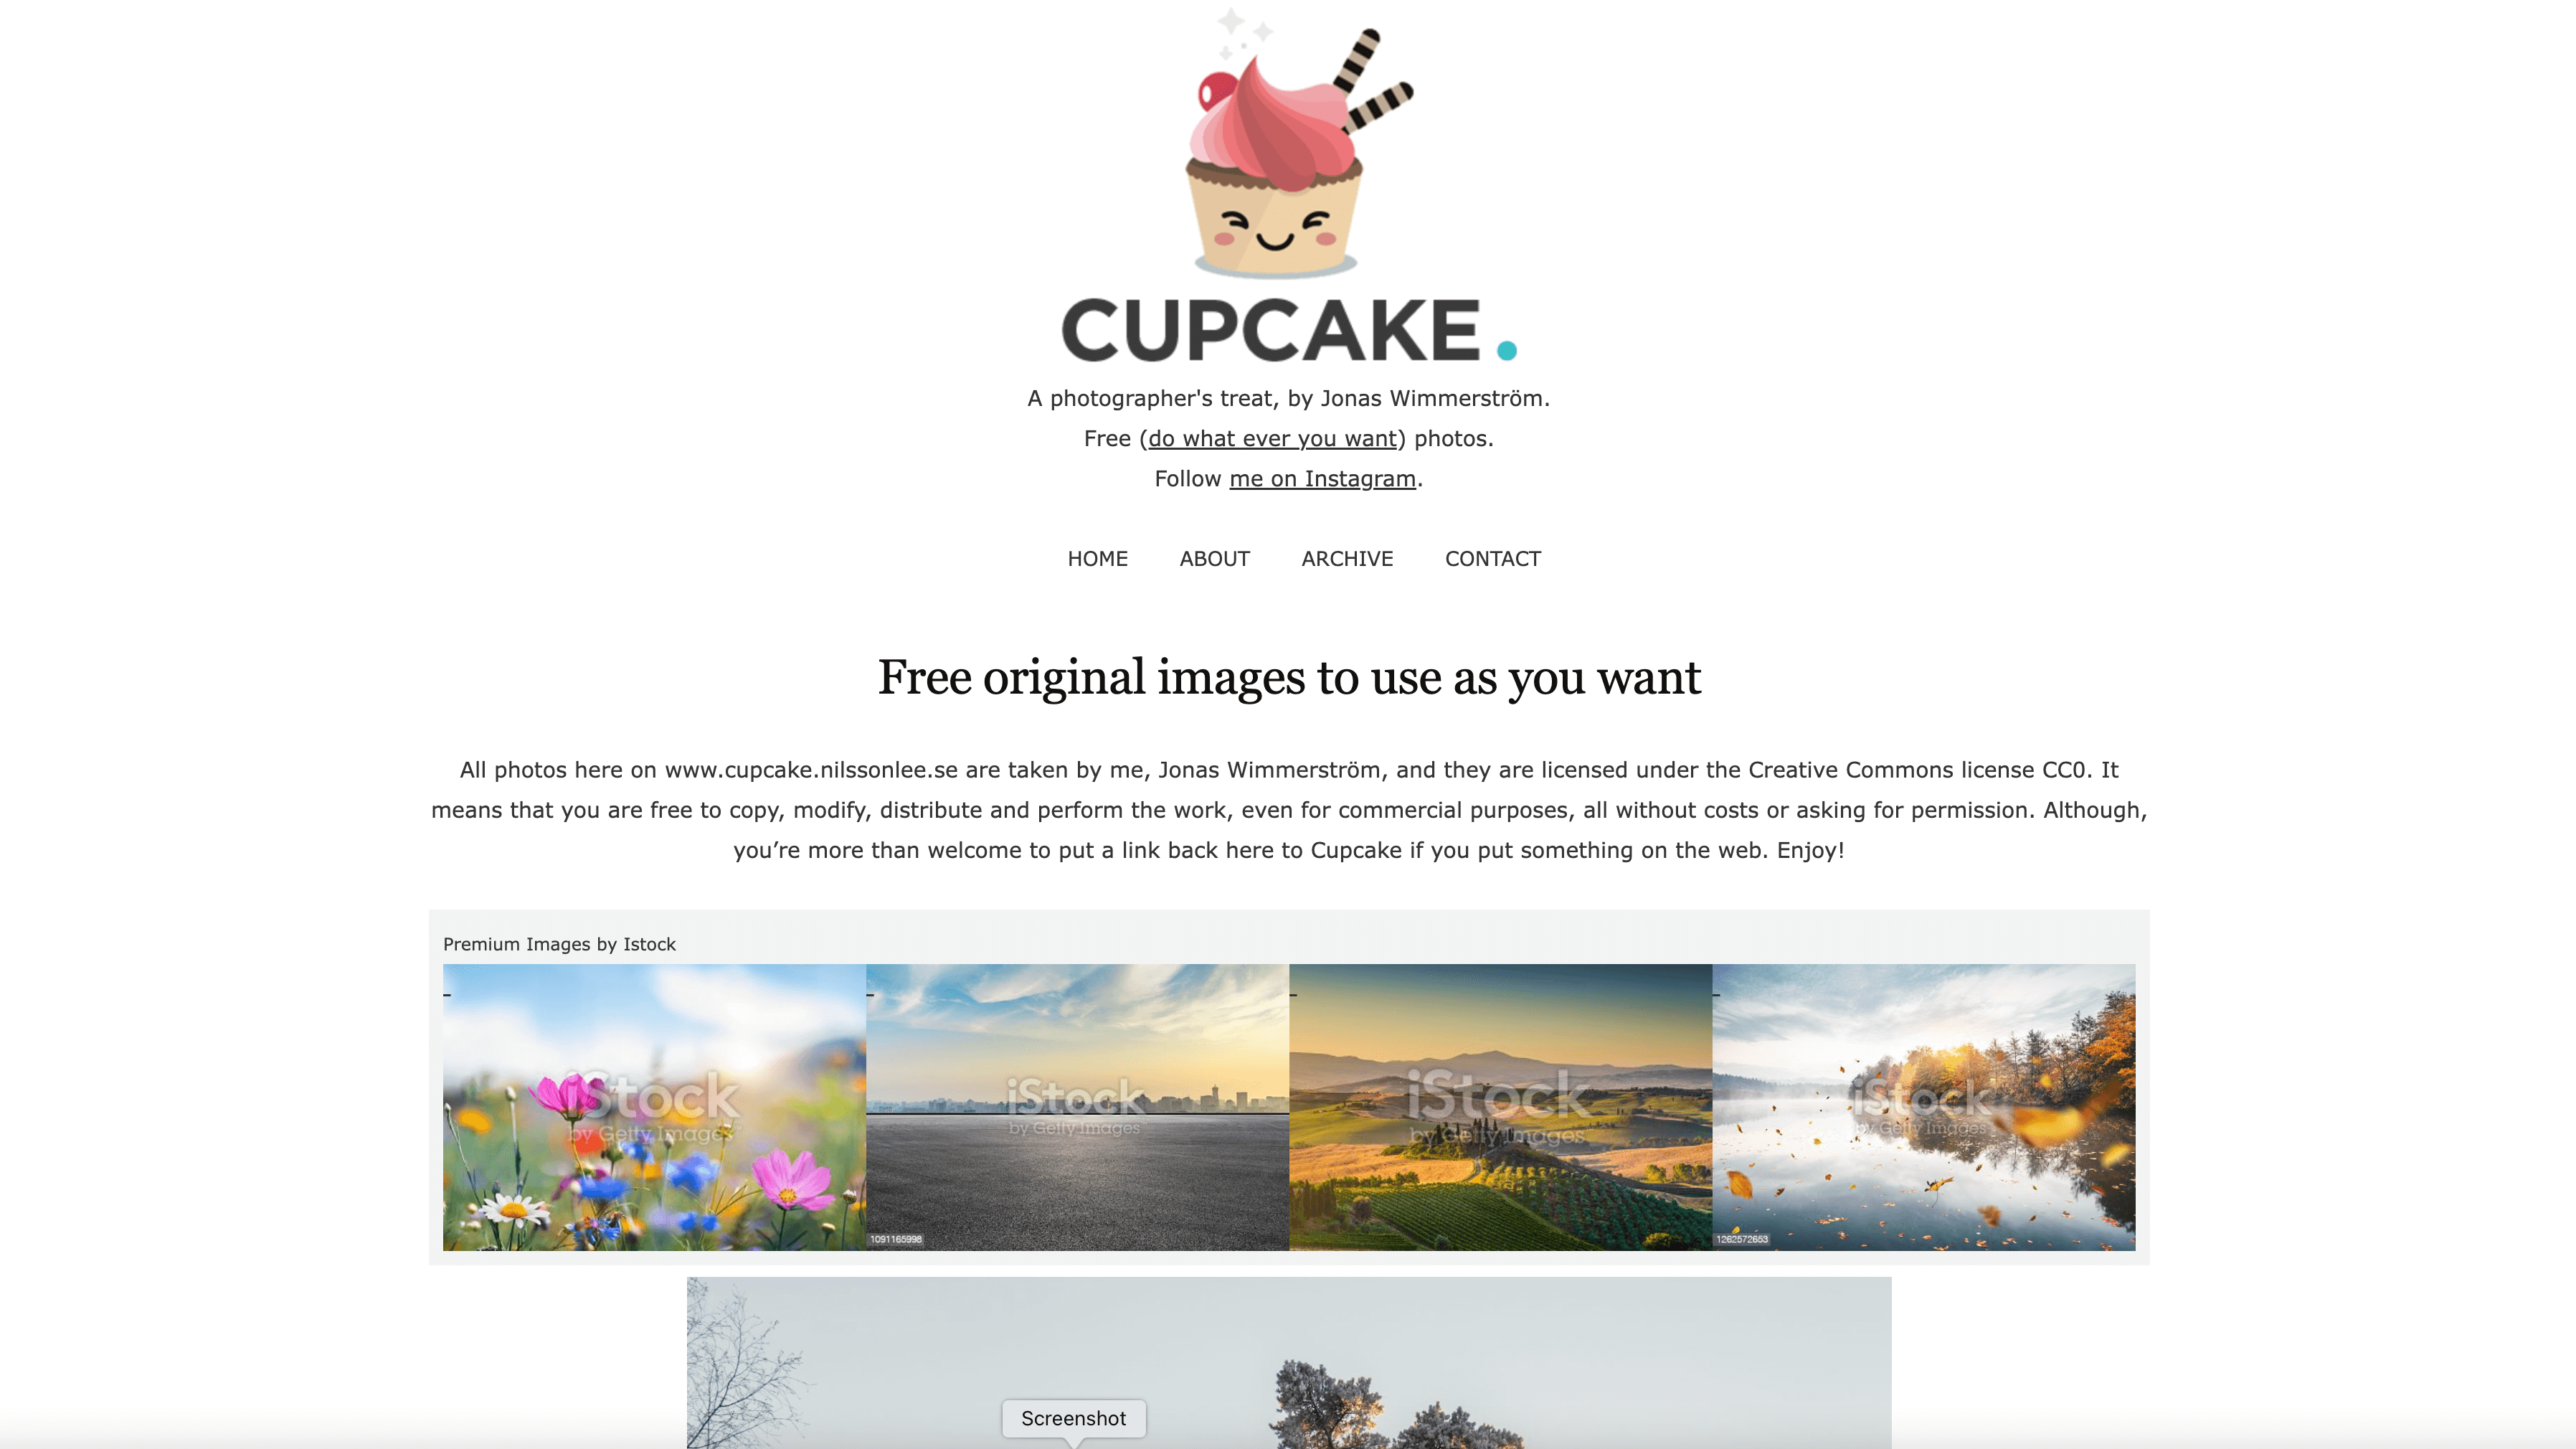 How to find free stock photos for social media on Cupcake